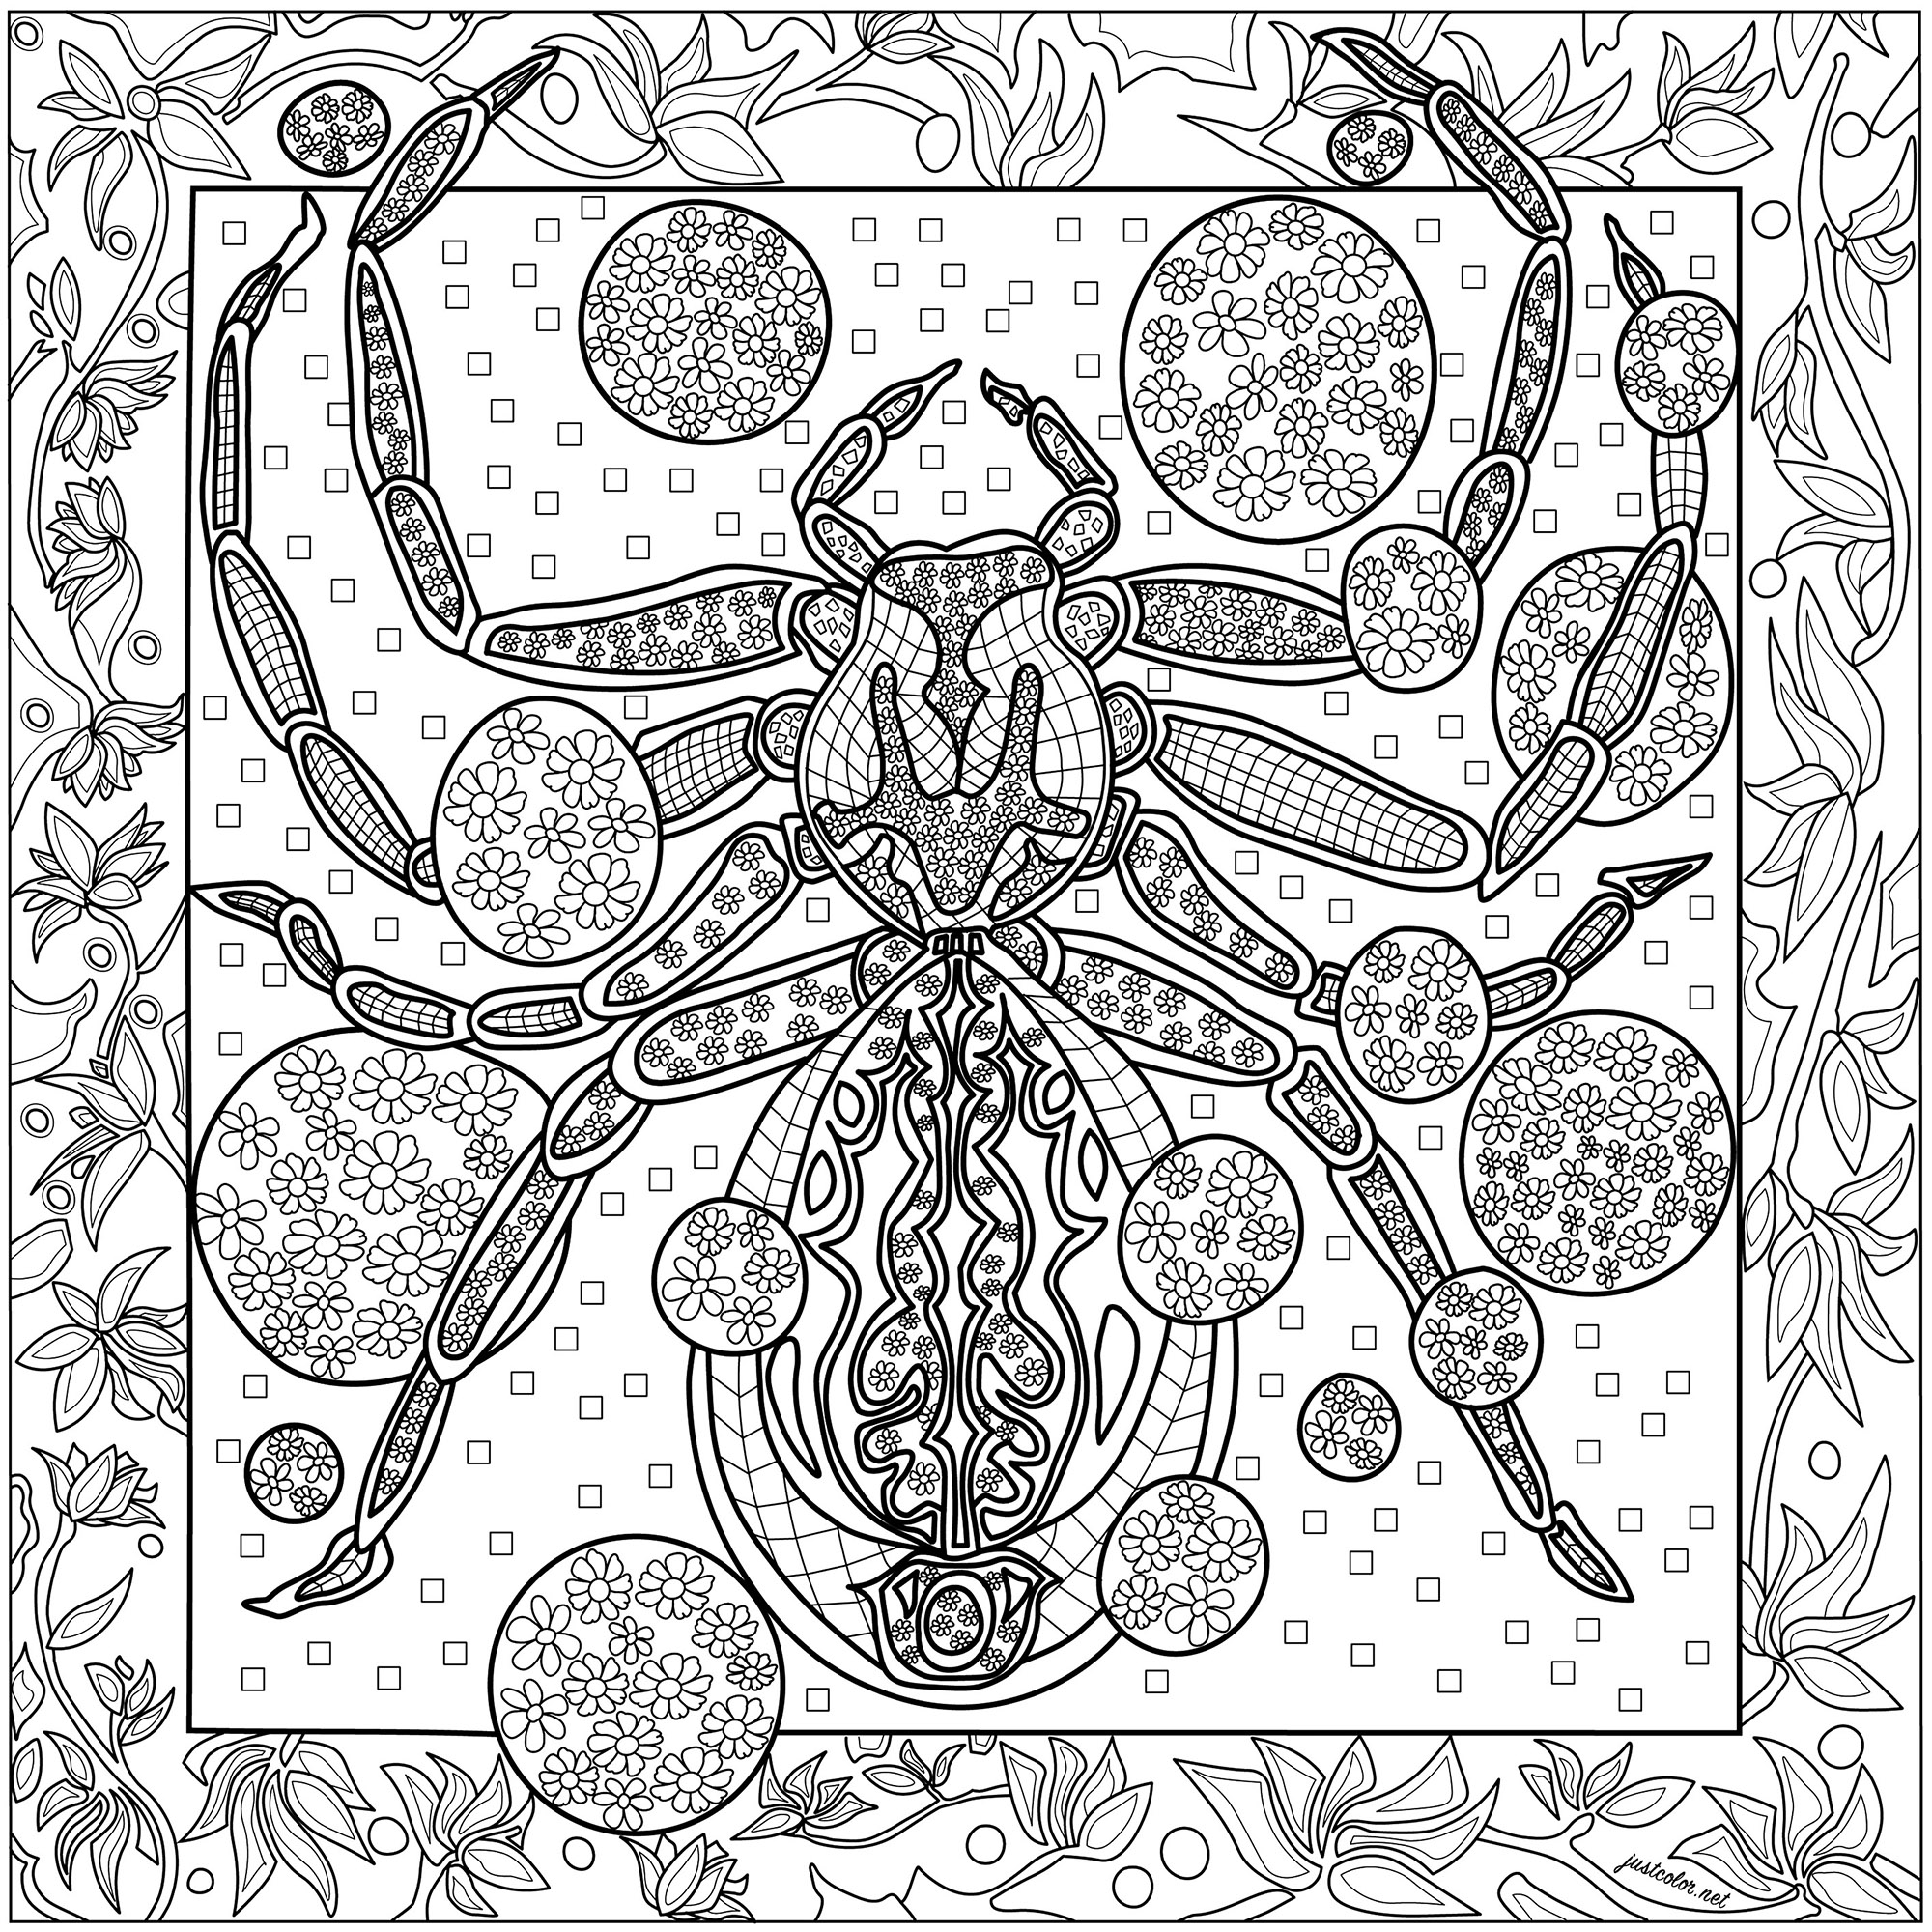 Magnificent spider with incredible patterns on a richly detailed background.  Many hours of coloring await you .., Artist : Morgan